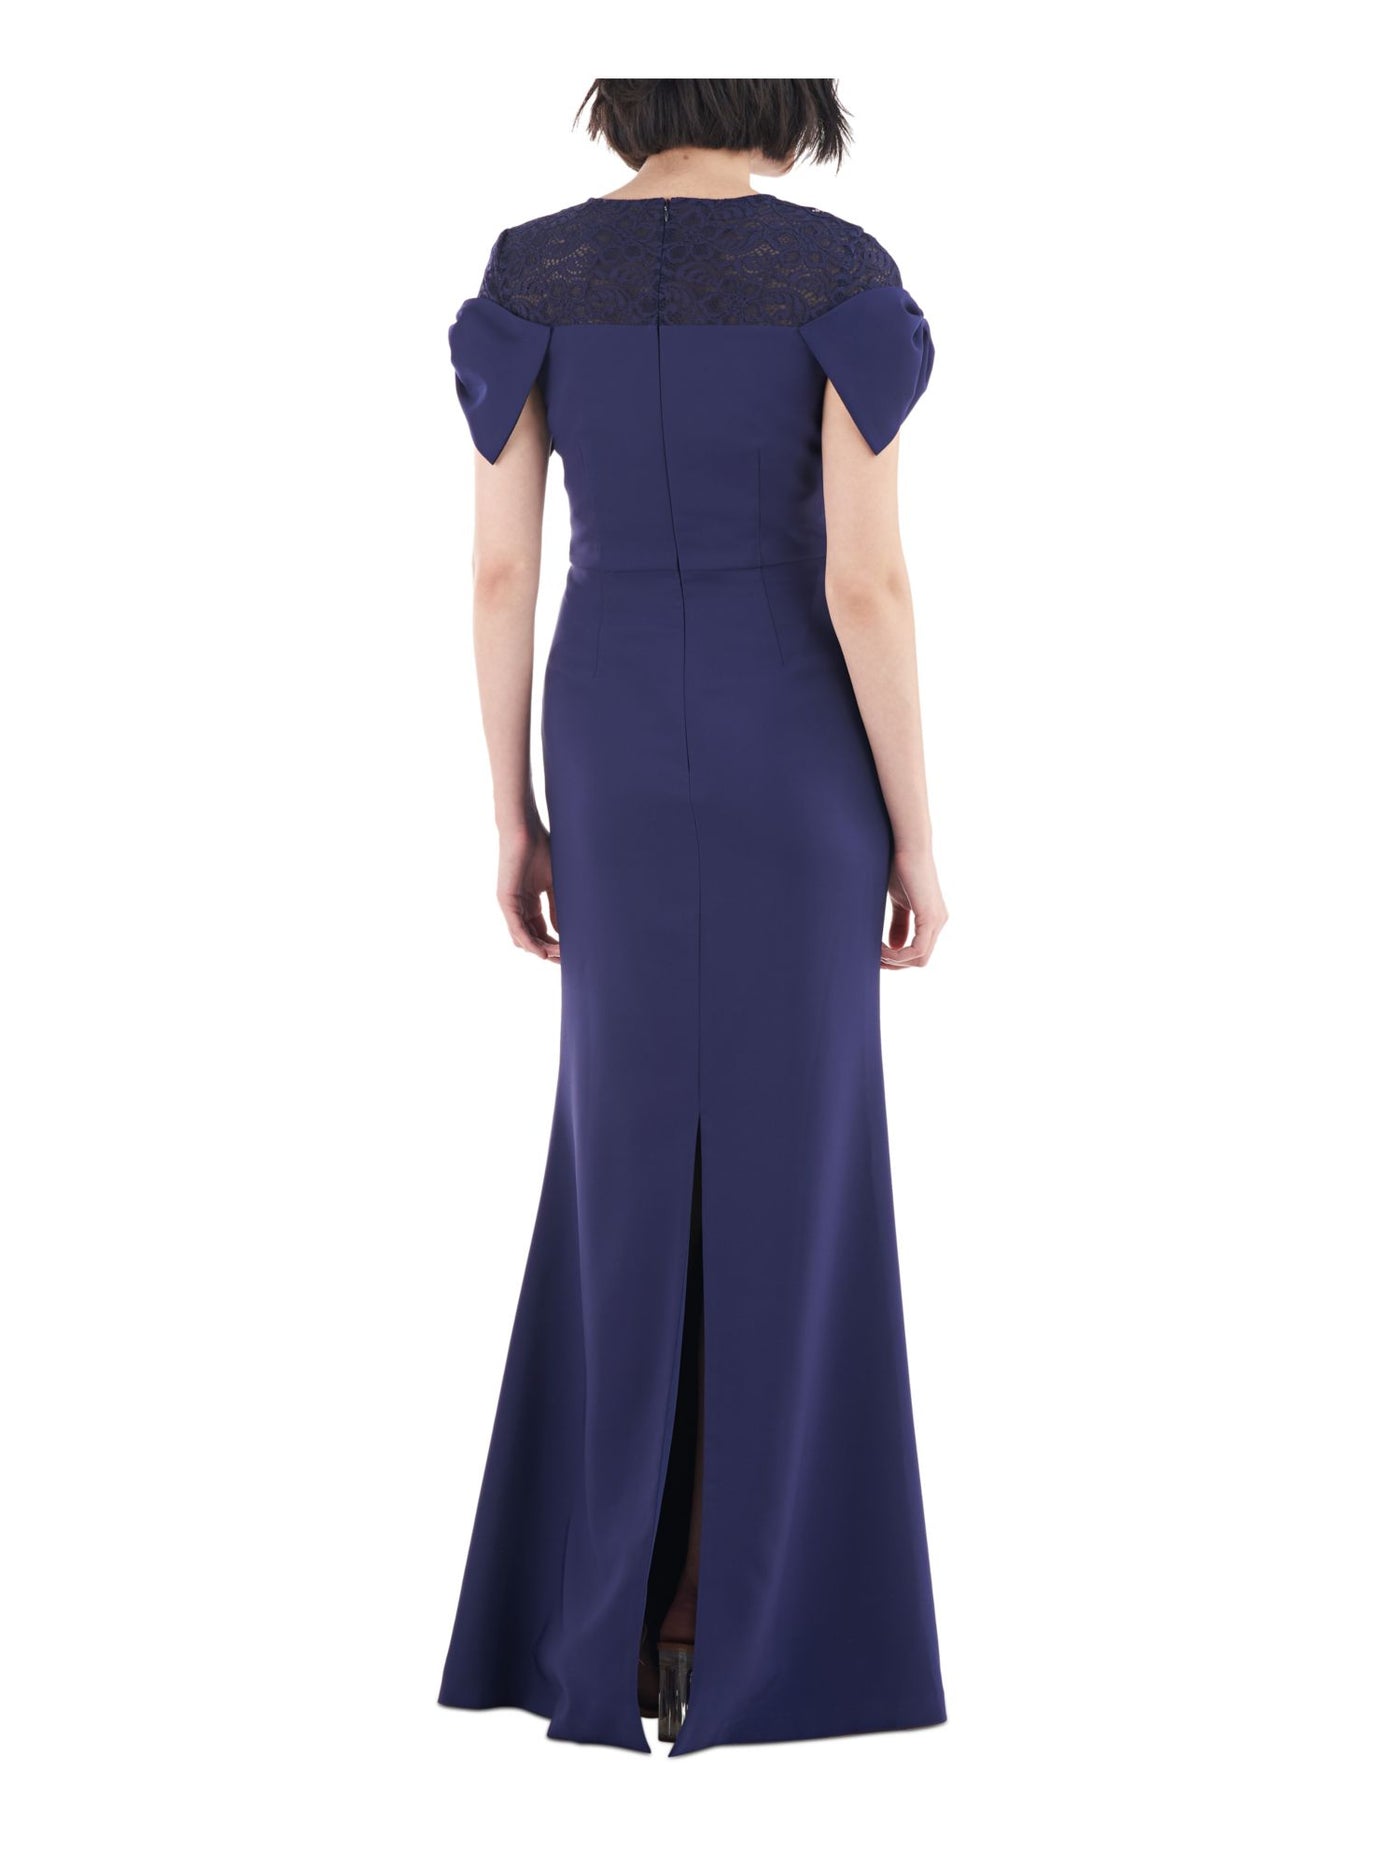 JS COLLECTION Womens Blue Zippered Slitted Bow Detail Cap Sleeves Crew Neck Full-Length Formal Gown Dress 4